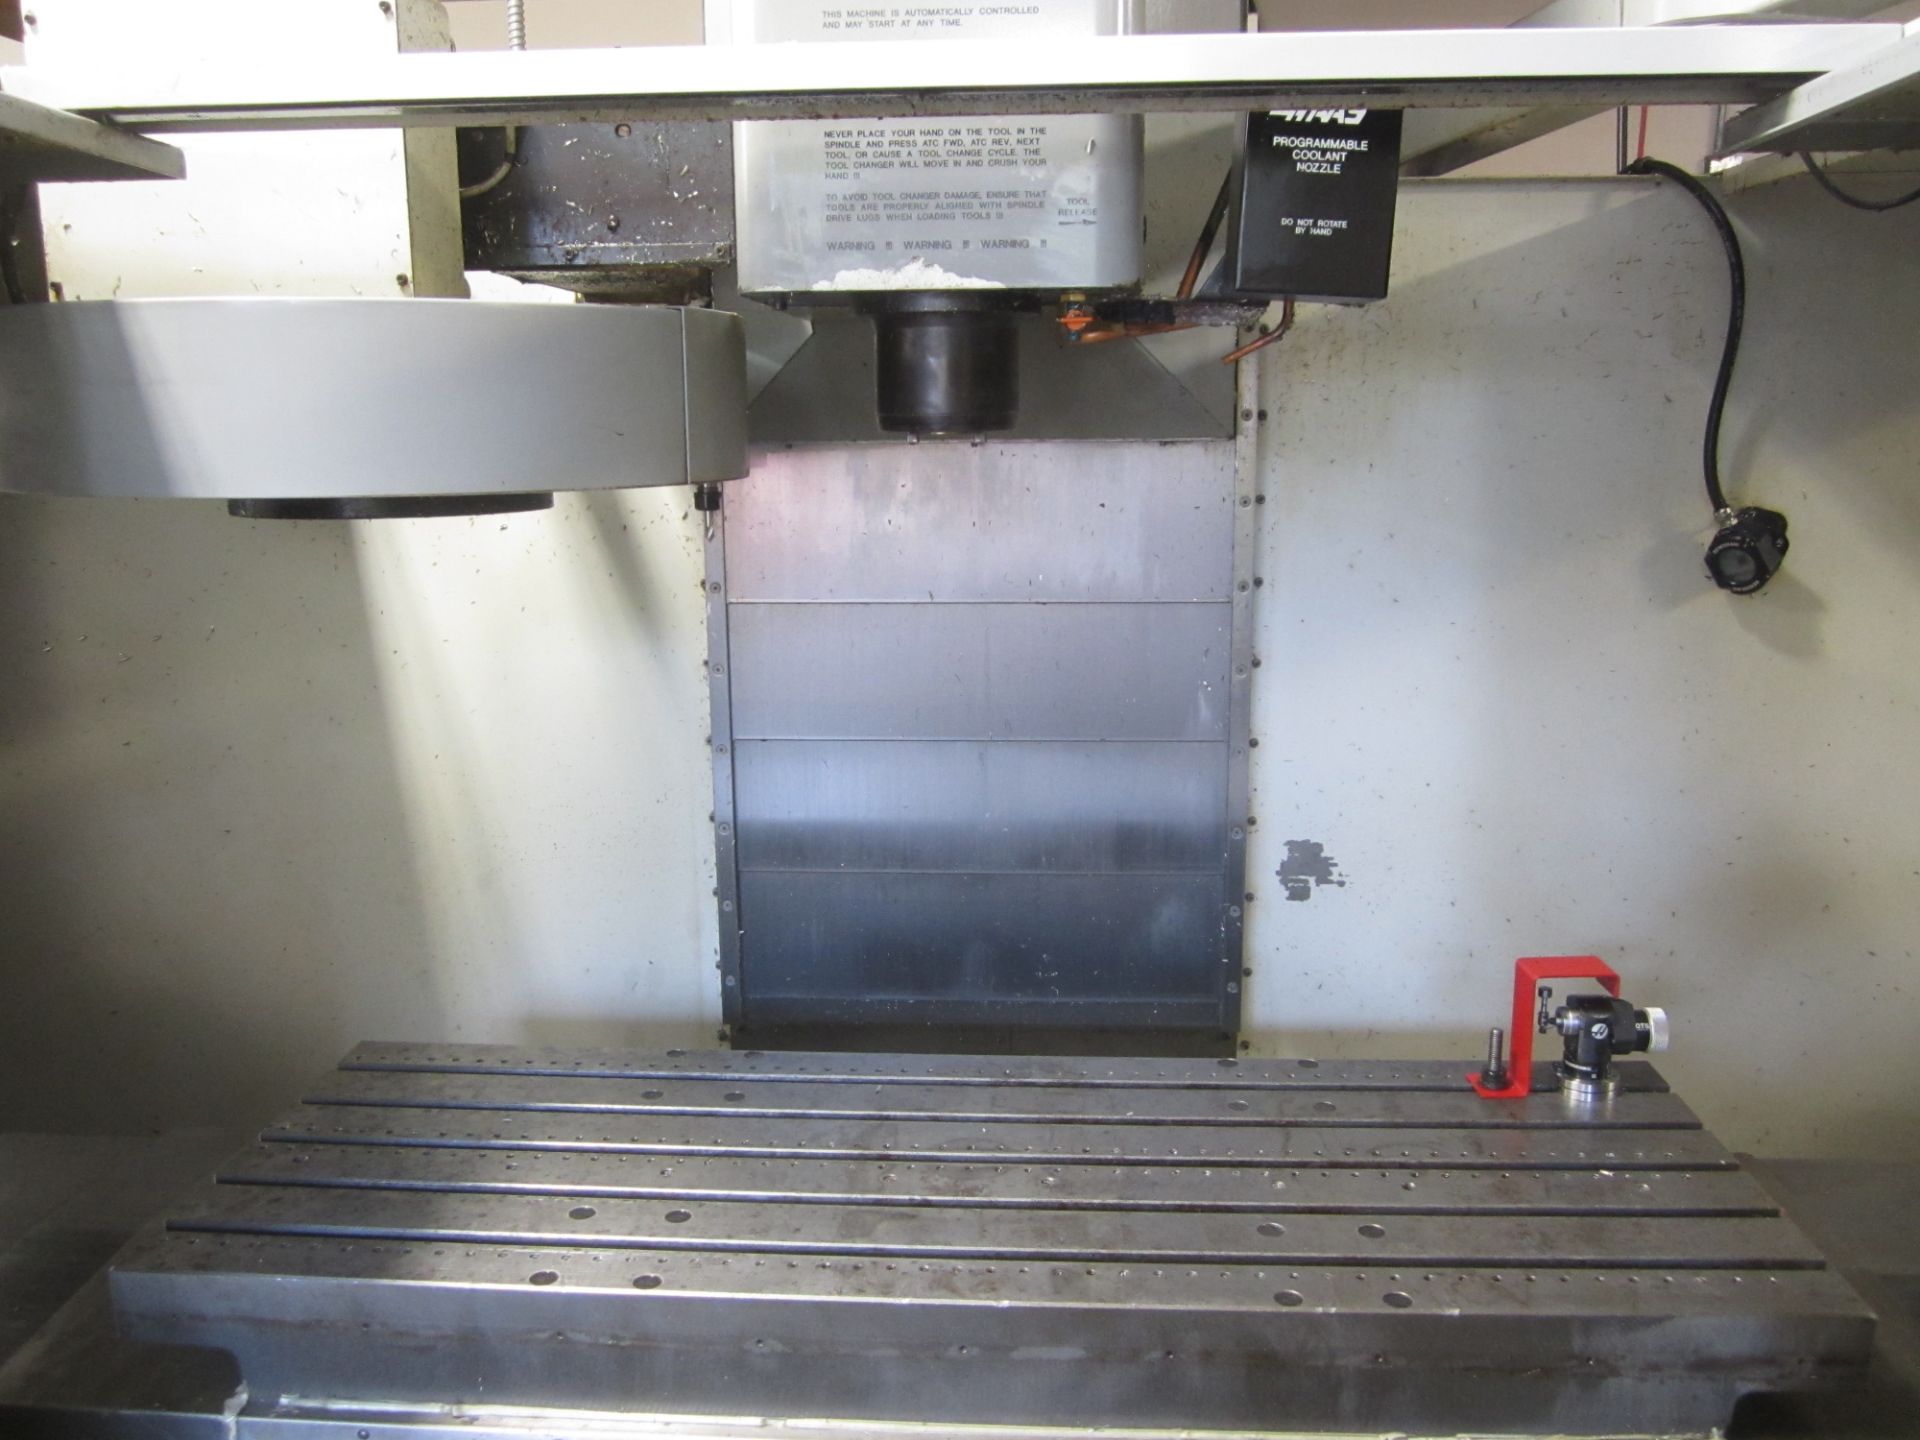 Haas VF-4 CNC Vertical Machining Center, s/n 20228, New 2000, Haas CNC Control, 20 HP, 40 Taper, - Image 5 of 16